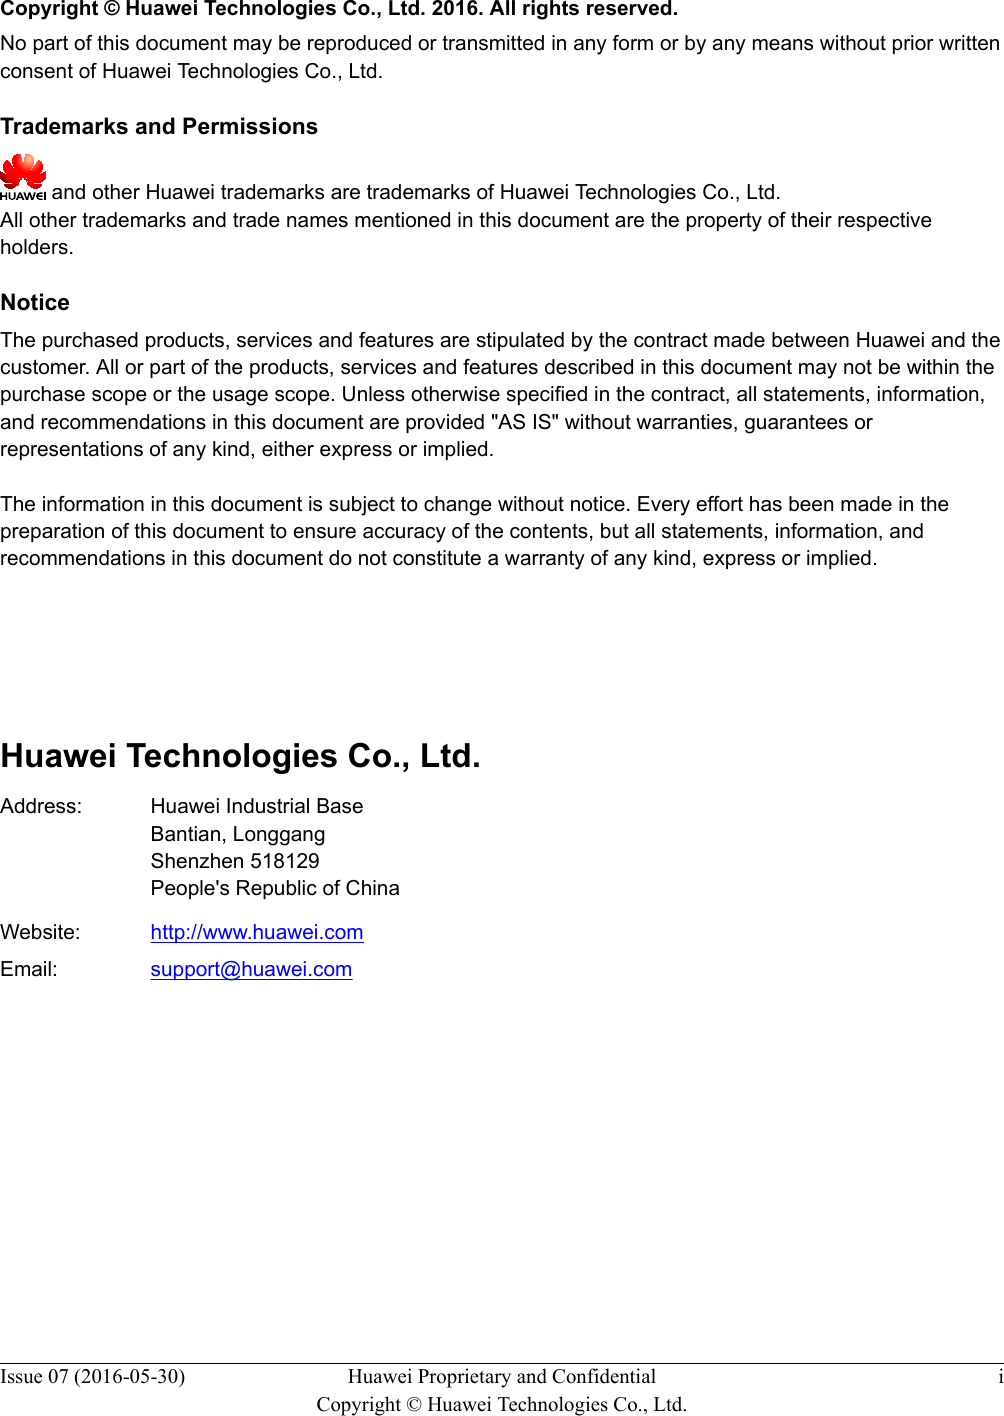   Copyright © Huawei Technologies Co., Ltd. 2016. All rights reserved.No part of this document may be reproduced or transmitted in any form or by any means without prior writtenconsent of Huawei Technologies Co., Ltd. Trademarks and Permissions and other Huawei trademarks are trademarks of Huawei Technologies Co., Ltd.All other trademarks and trade names mentioned in this document are the property of their respectiveholders. NoticeThe purchased products, services and features are stipulated by the contract made between Huawei and thecustomer. All or part of the products, services and features described in this document may not be within thepurchase scope or the usage scope. Unless otherwise specified in the contract, all statements, information,and recommendations in this document are provided &quot;AS IS&quot; without warranties, guarantees orrepresentations of any kind, either express or implied.The information in this document is subject to change without notice. Every effort has been made in thepreparation of this document to ensure accuracy of the contents, but all statements, information, andrecommendations in this document do not constitute a warranty of any kind, express or implied.        Huawei Technologies Co., Ltd.Address: Huawei Industrial BaseBantian, LonggangShenzhen 518129People&apos;s Republic of ChinaWebsite: http://www.huawei.comEmail: support@huawei.comIssue 07 (2016-05-30) Huawei Proprietary and ConfidentialCopyright © Huawei Technologies Co., Ltd.i